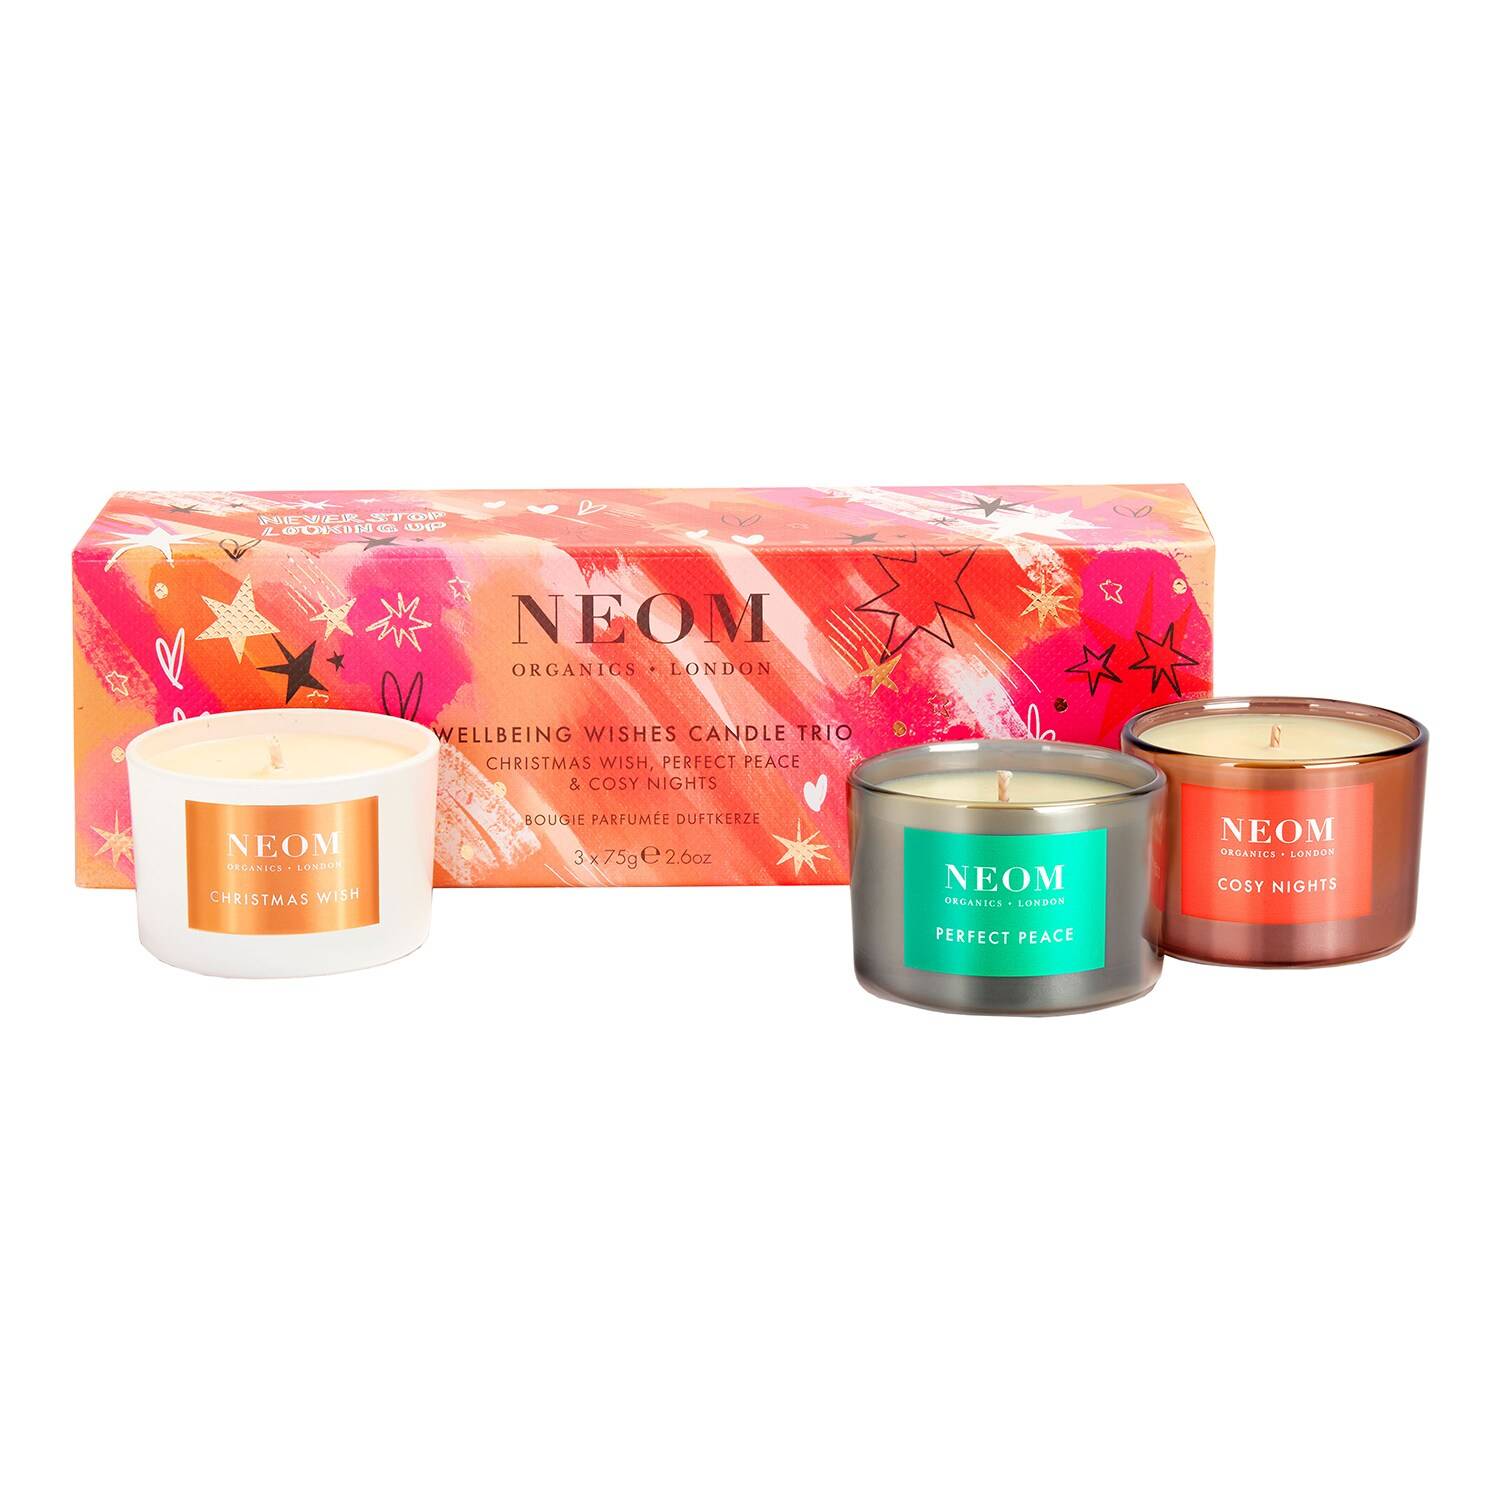 Neom Organics London Wellbeing Wishes Candle Trio Set